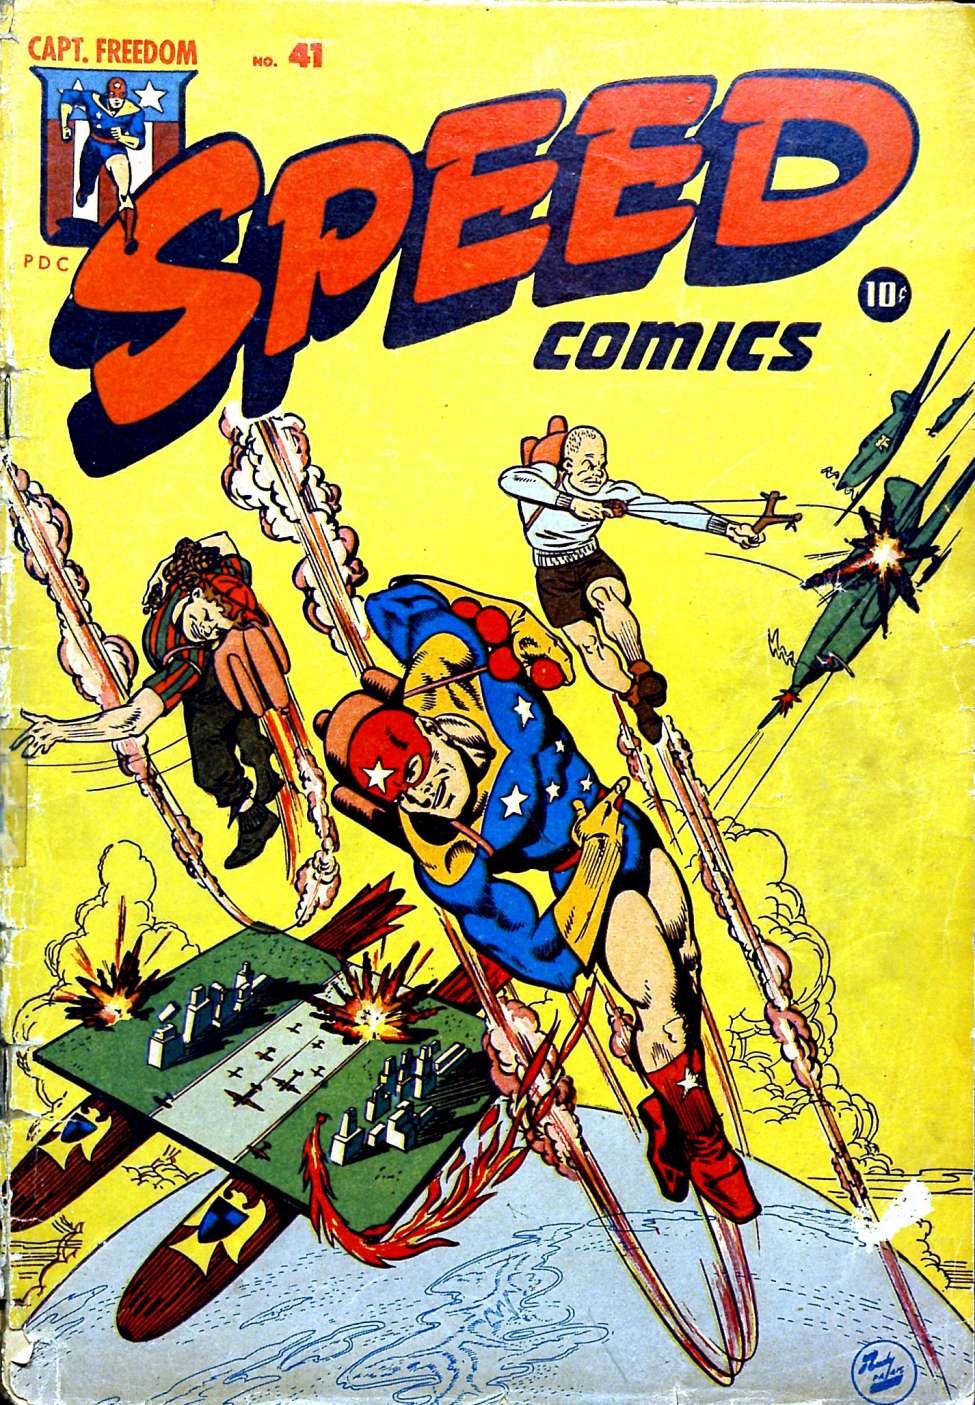 Comic Book Cover For Speed Comics 41 (alt) - Version 2